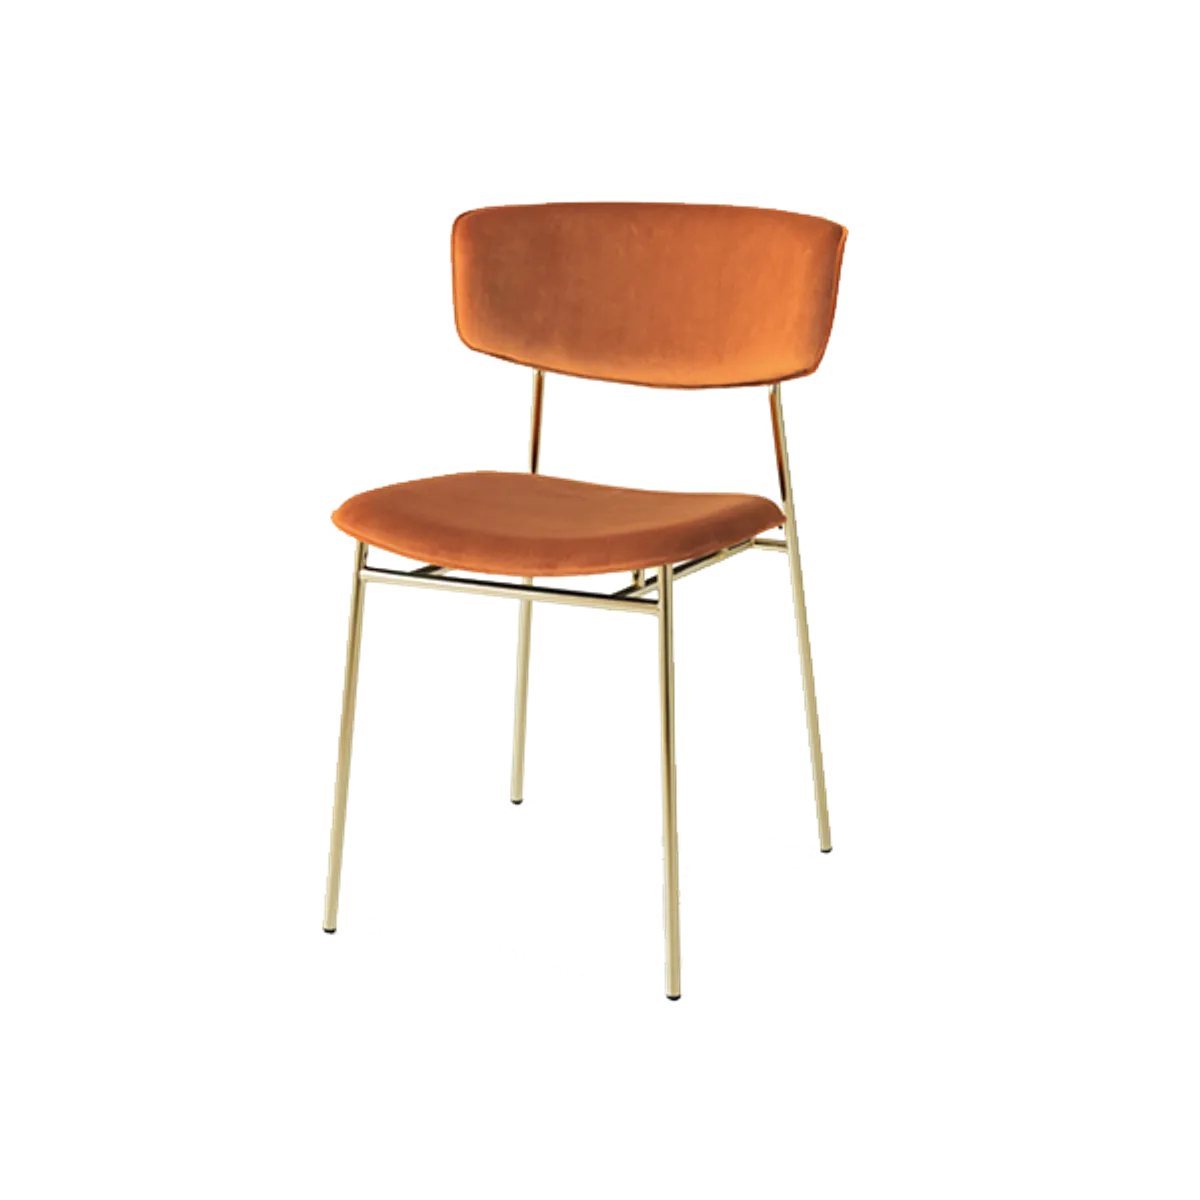 Web Fifties Side Chair Orangevelvet Brassmetal Inside Out Contracts